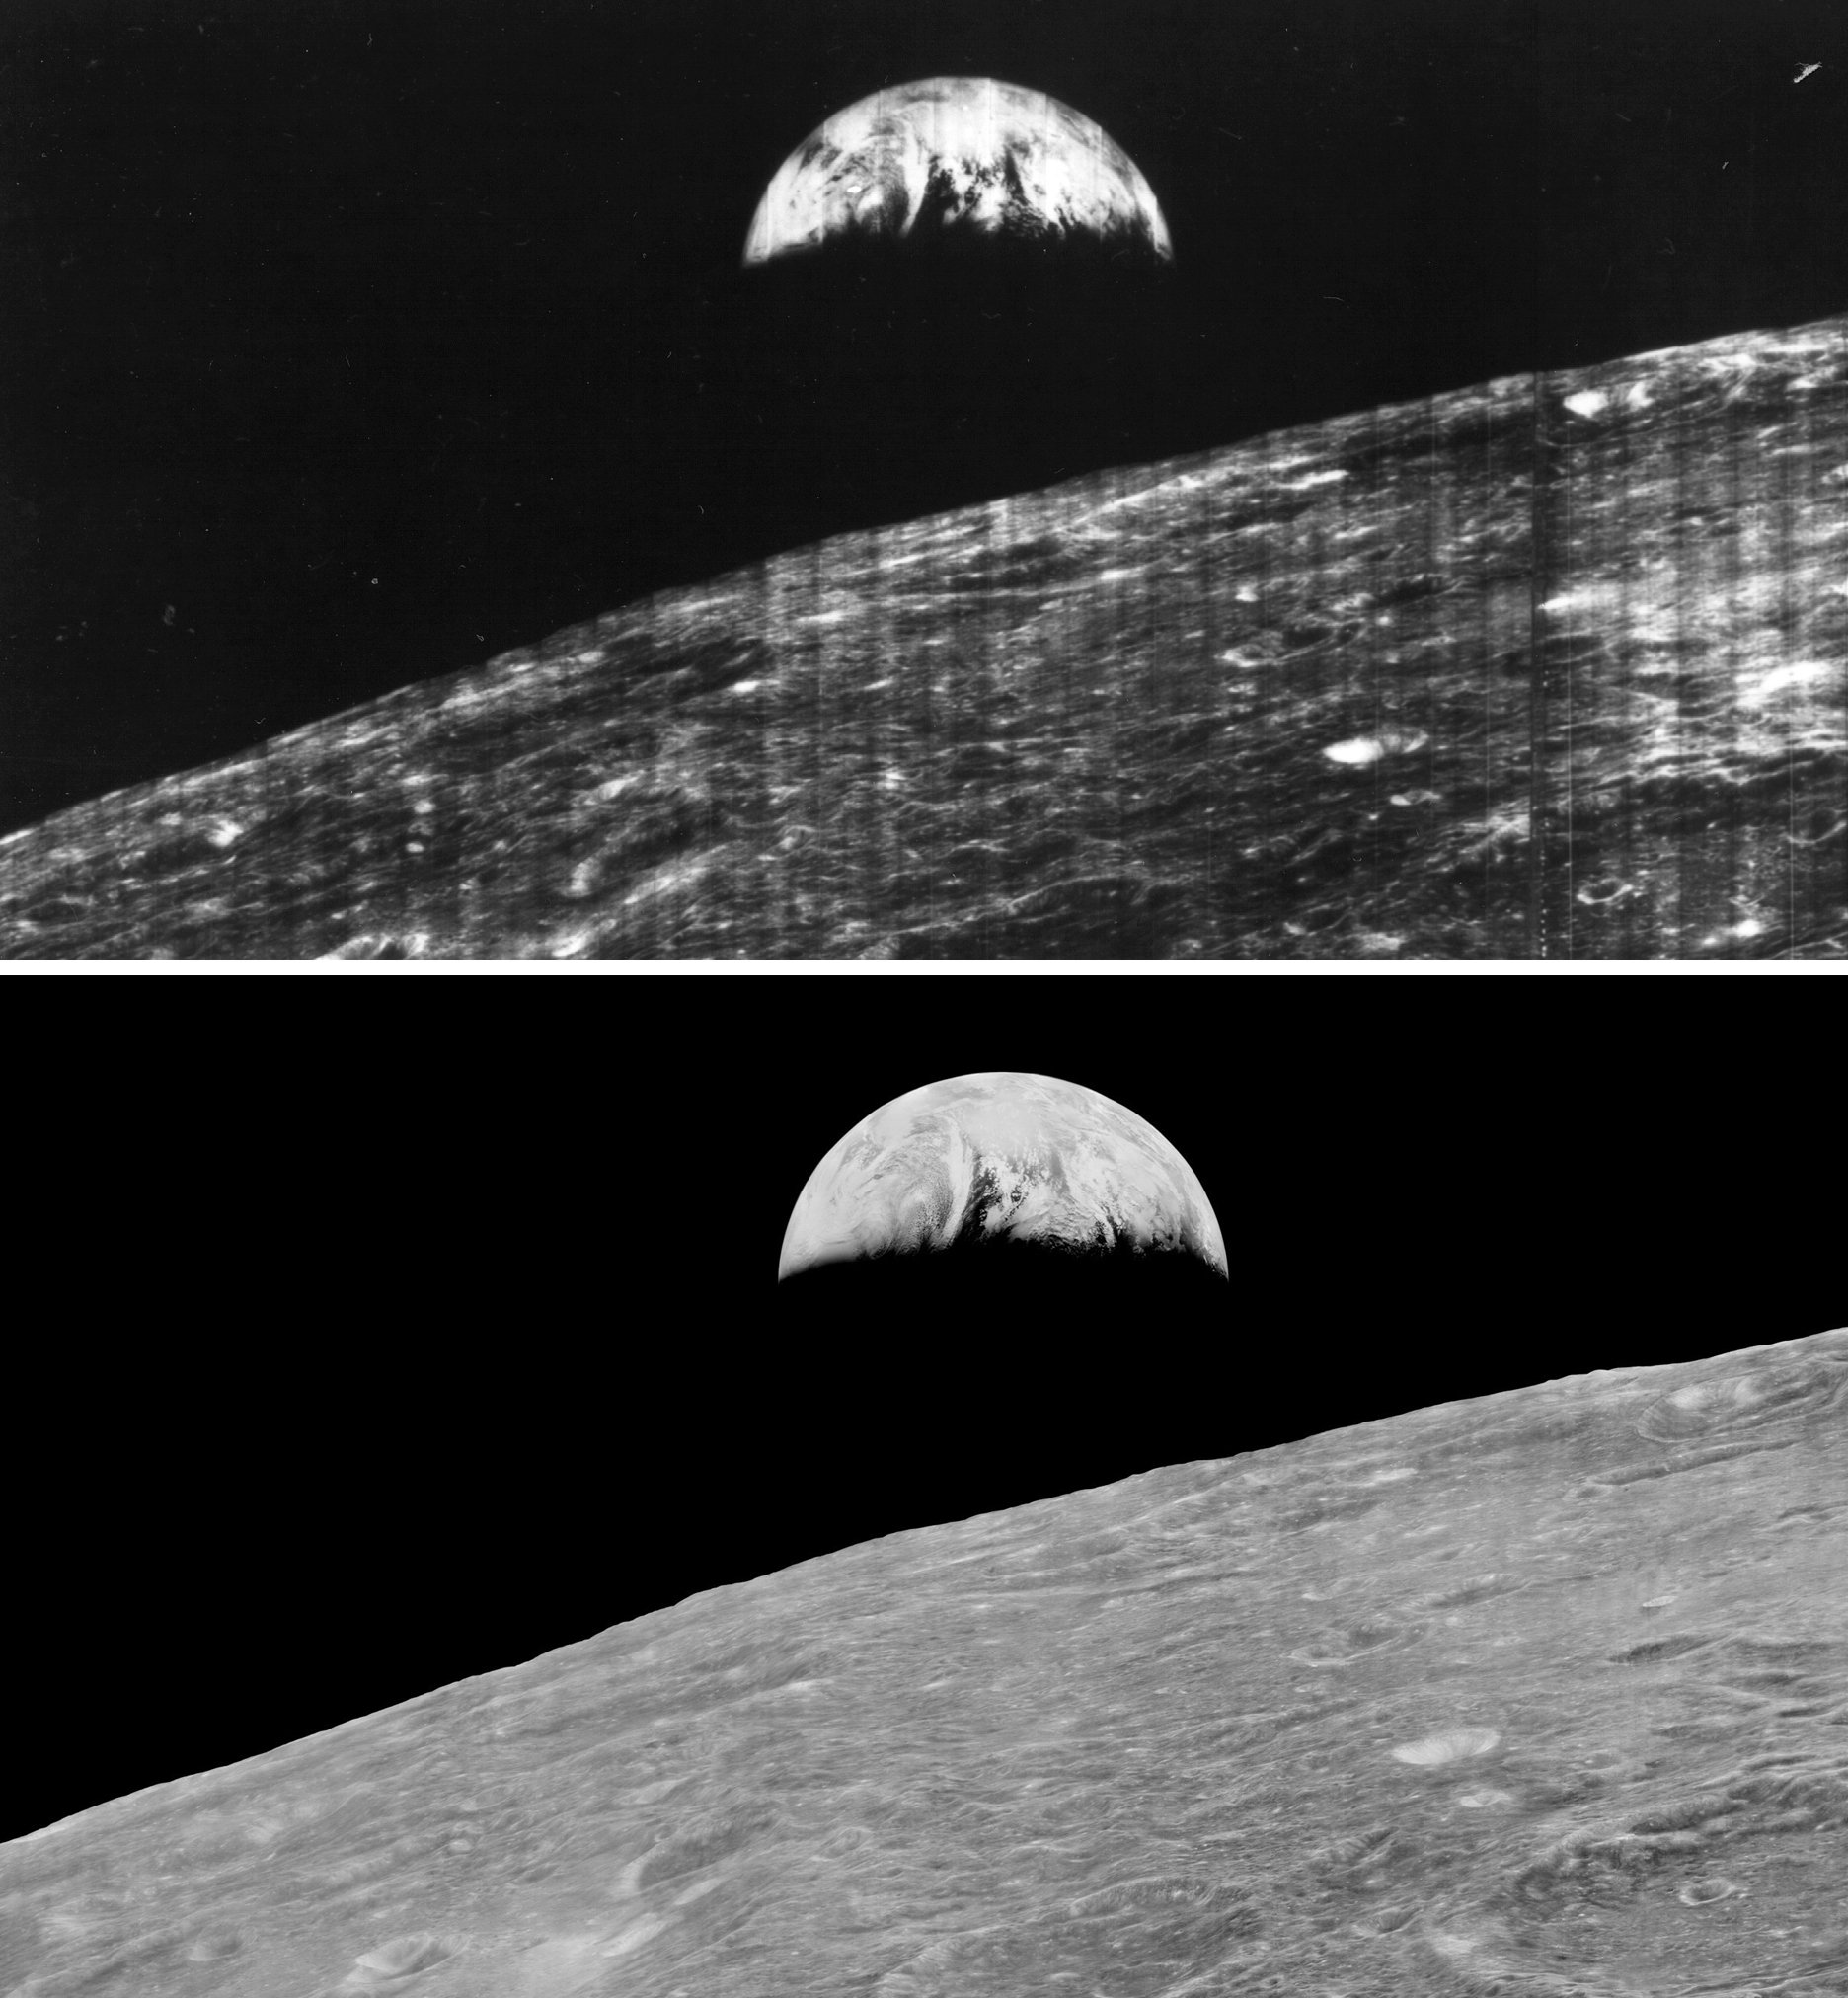 Techno-Archaeologists Recover and Digitalize Long-Lost Lunar Orbiter Photos of the Moon - The Phoblographer